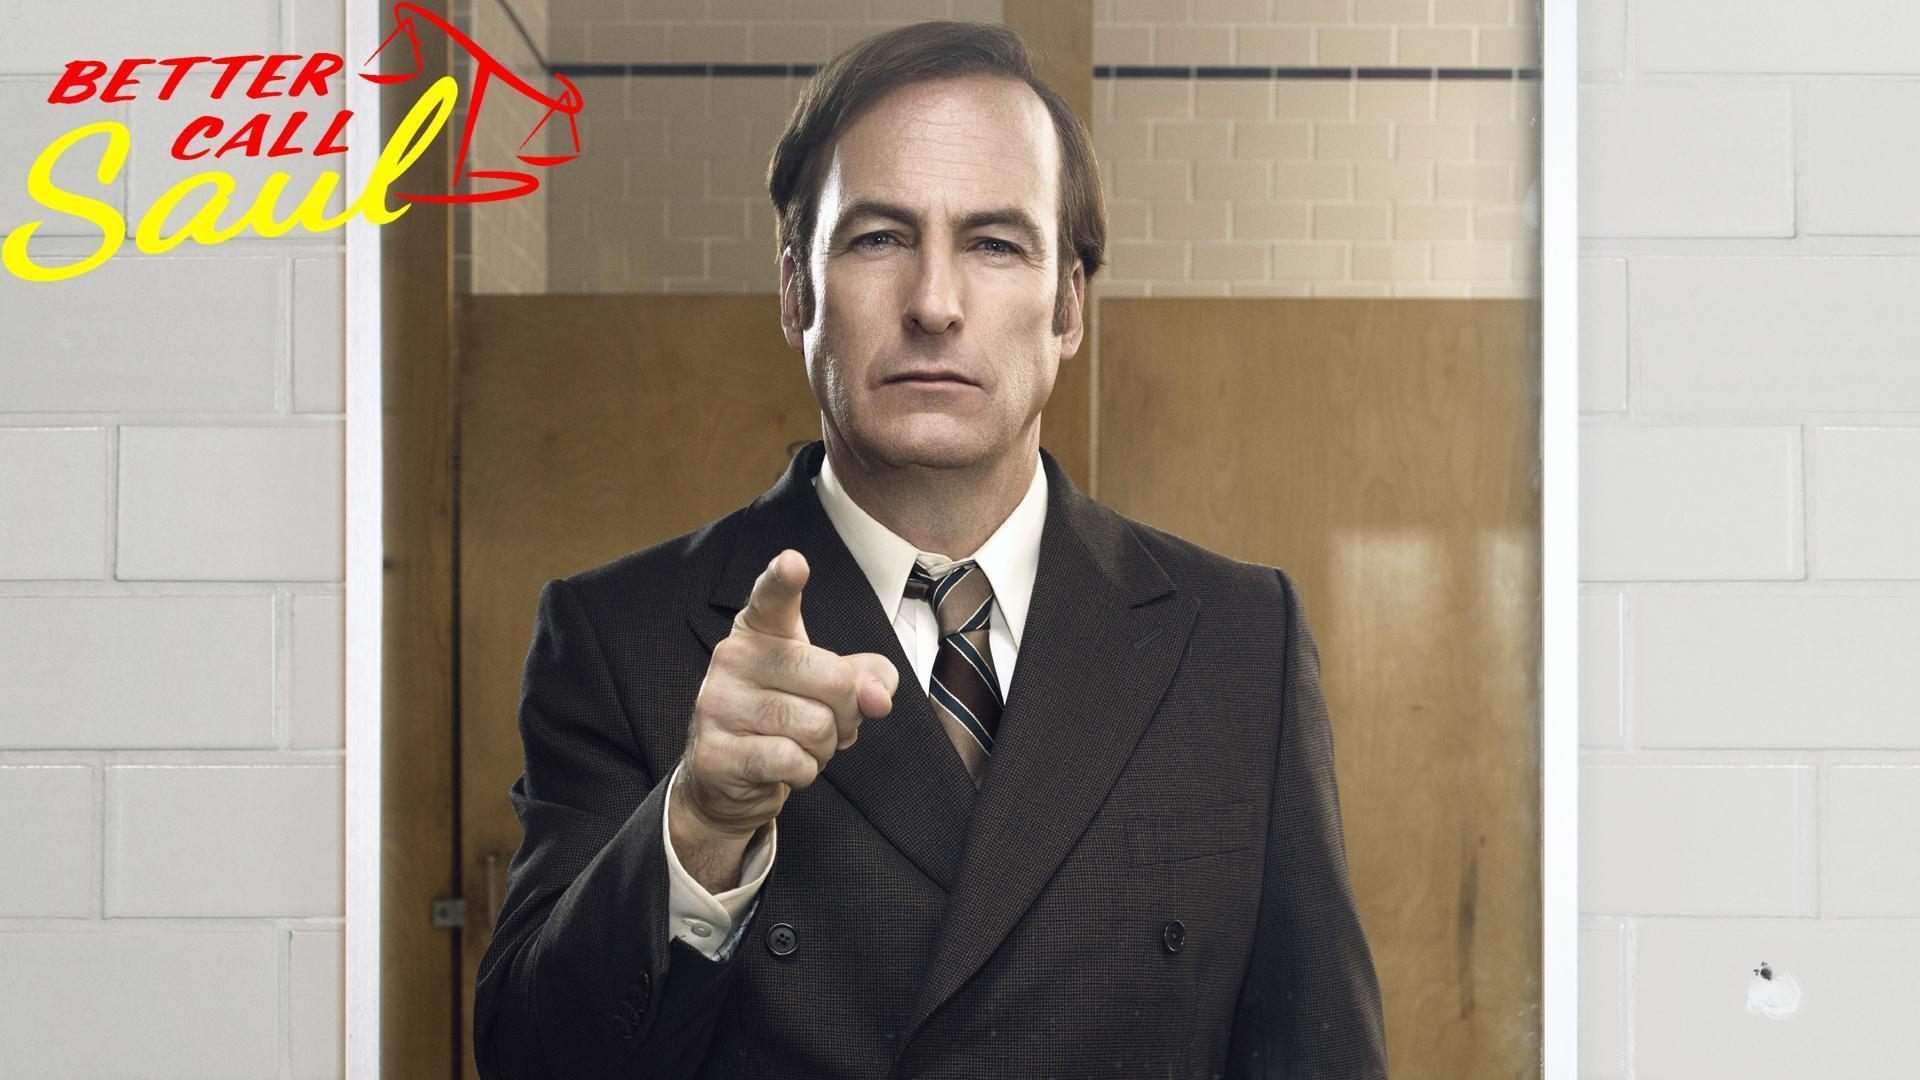 I created some better Call Saul! wallpaper